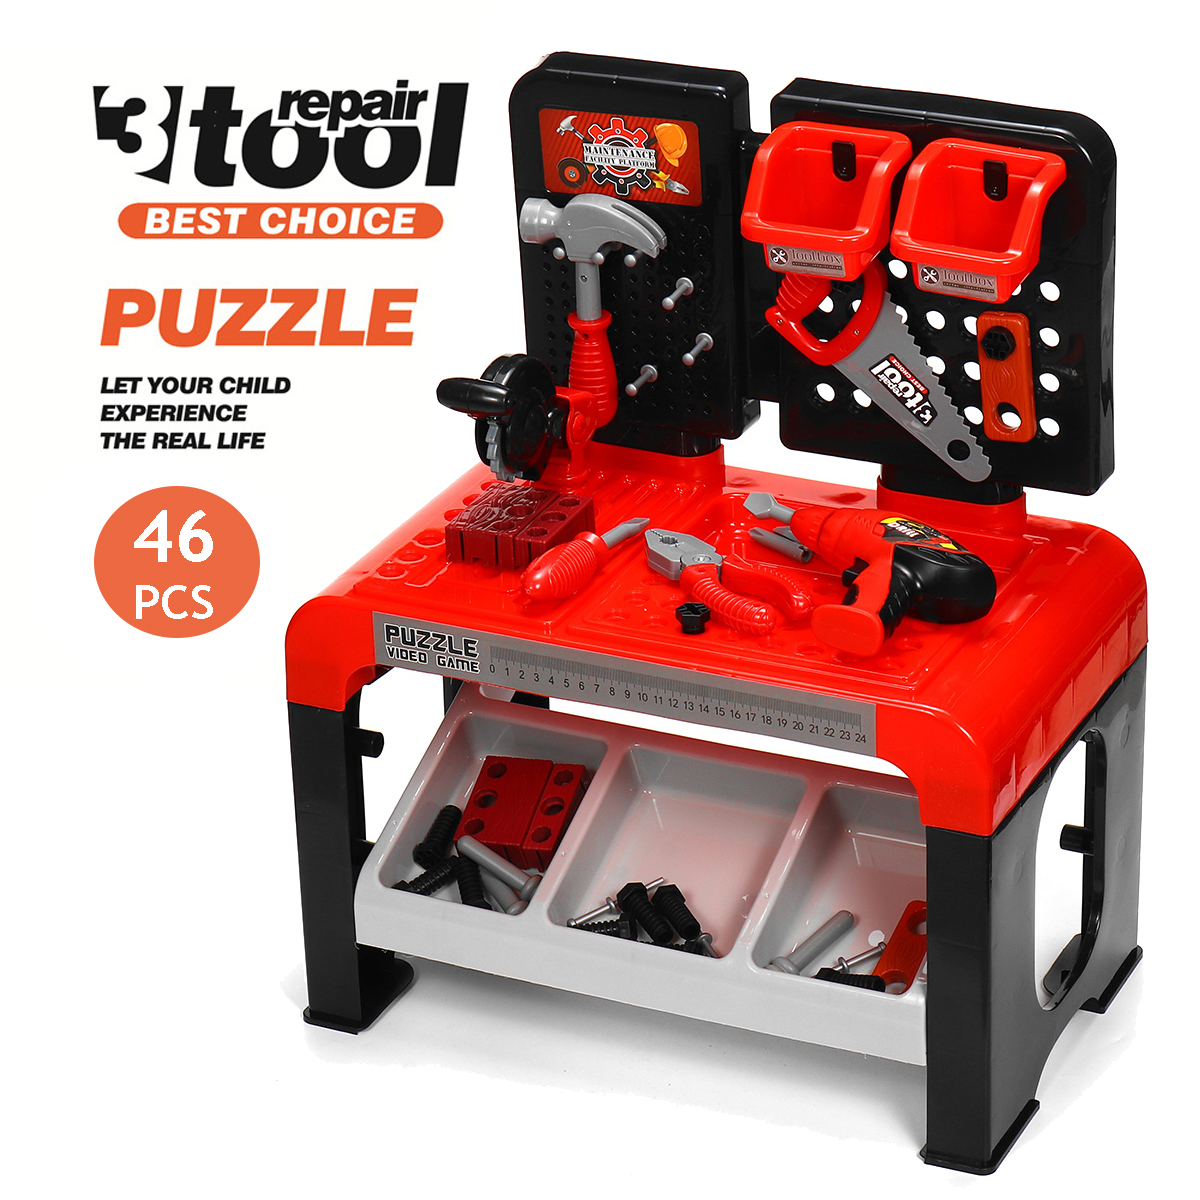 4664-Pcs-2-Tiers-Simulation-Work-Bench-Repair-Tools-Early-Educational-Puzzle-Toy-with-2-Upper-Storag-1805315-9